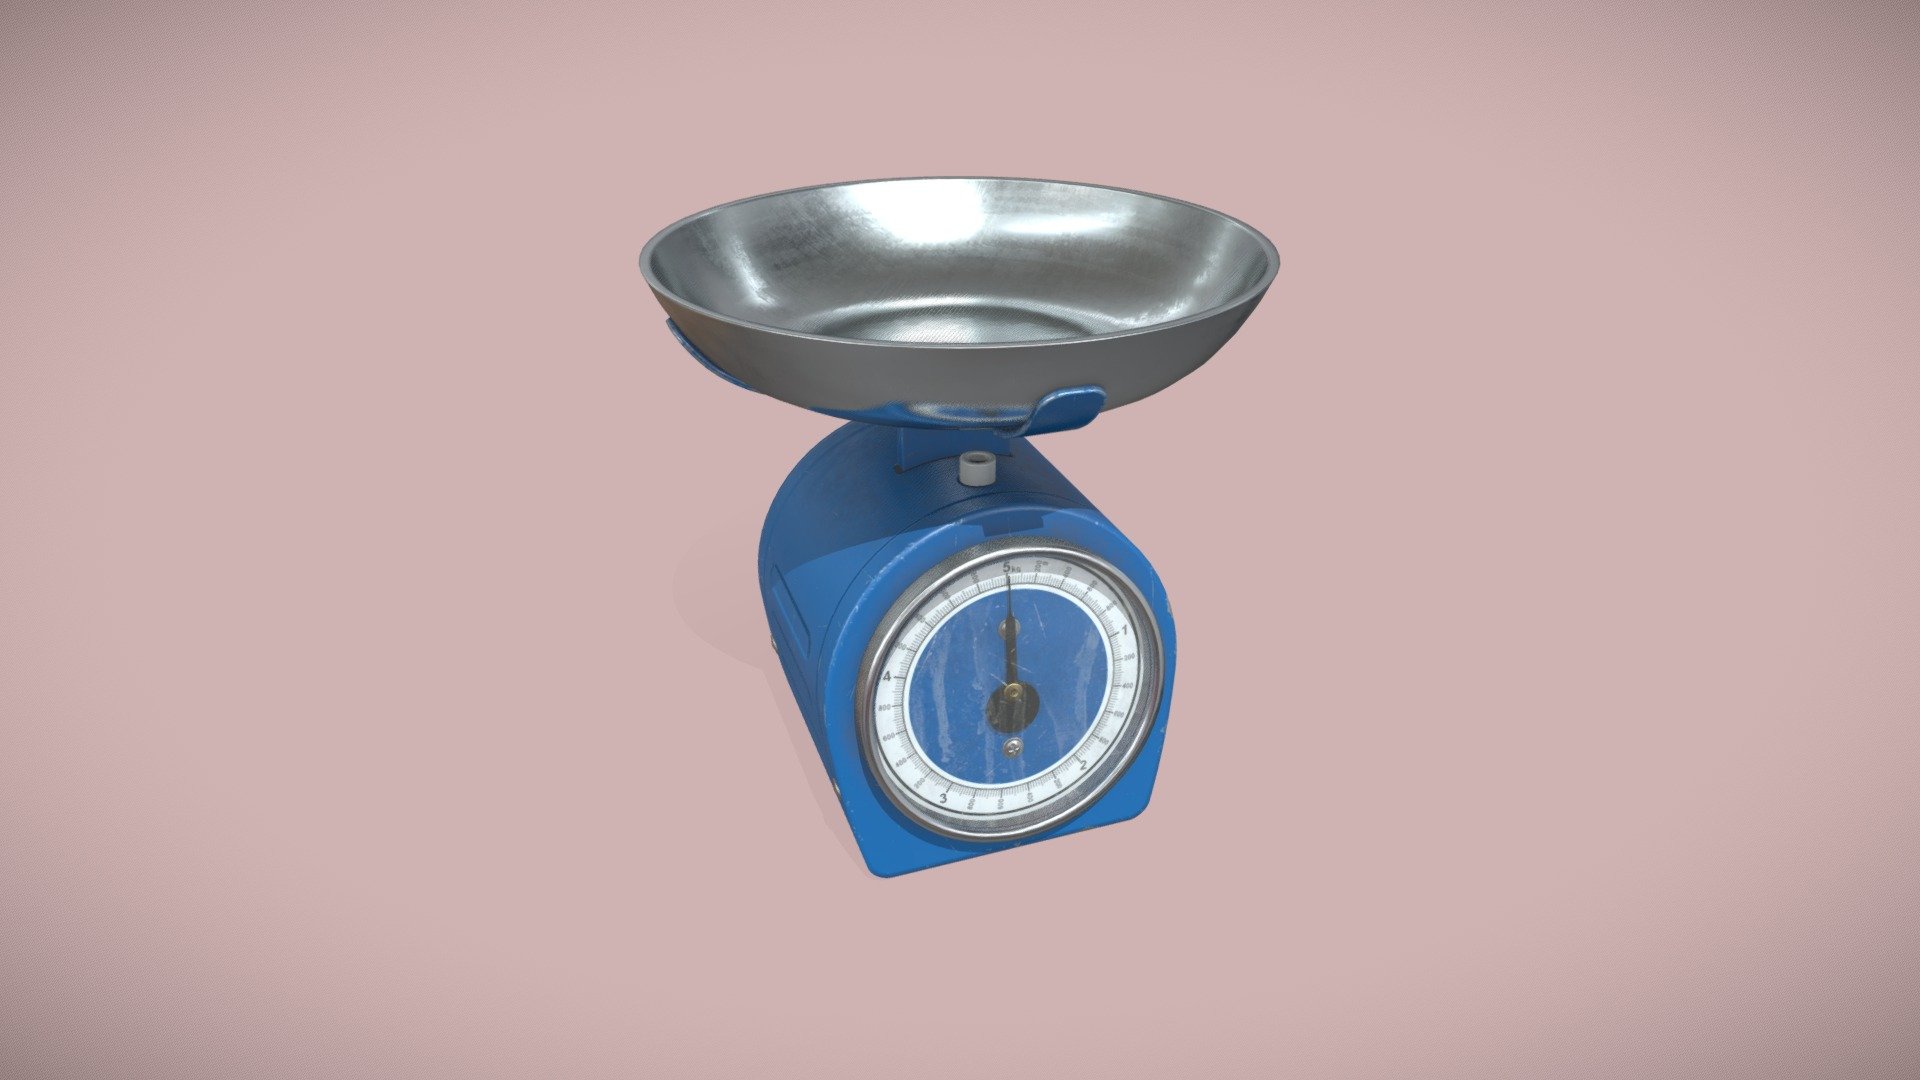 Game ready low-poly Kitchen Scales model with PBR textures for game engines/renderers. 

This product is intended for game/real time/background use. This model is not intended for subdivision. Geometry is triangulated. Model unwrapped manually. All materials and objects named appropriately. Scaled to approximate real world size. Tested in Marmoset Toolbag 3. Tested in Unreal Engine 4. Tested in Unity. No special plugins needed. .obj and .fbx versions exported from Blender 2.83.

Polycount: 3963 tris, 2160 vertices.

4096x4096 textures in png format:
- General PBR Metallic/Roughness  textures: BaseColor, Metallic, Roughness, Normal, AO;
- Unity Textures: Albedo, MetallicSmoothness, Normal, AO;
- Unreal Engine 4 textures: BaseColor, OcclusionRoughnessMetallic, Normal;
- PBR Specular/Glossiness textures: Diffuse, Specular, Glossiness, Normal, AO.

Also included clean variant of textures without damage.
 - Kitchen Scales - 3D model by AshMesh 3d model